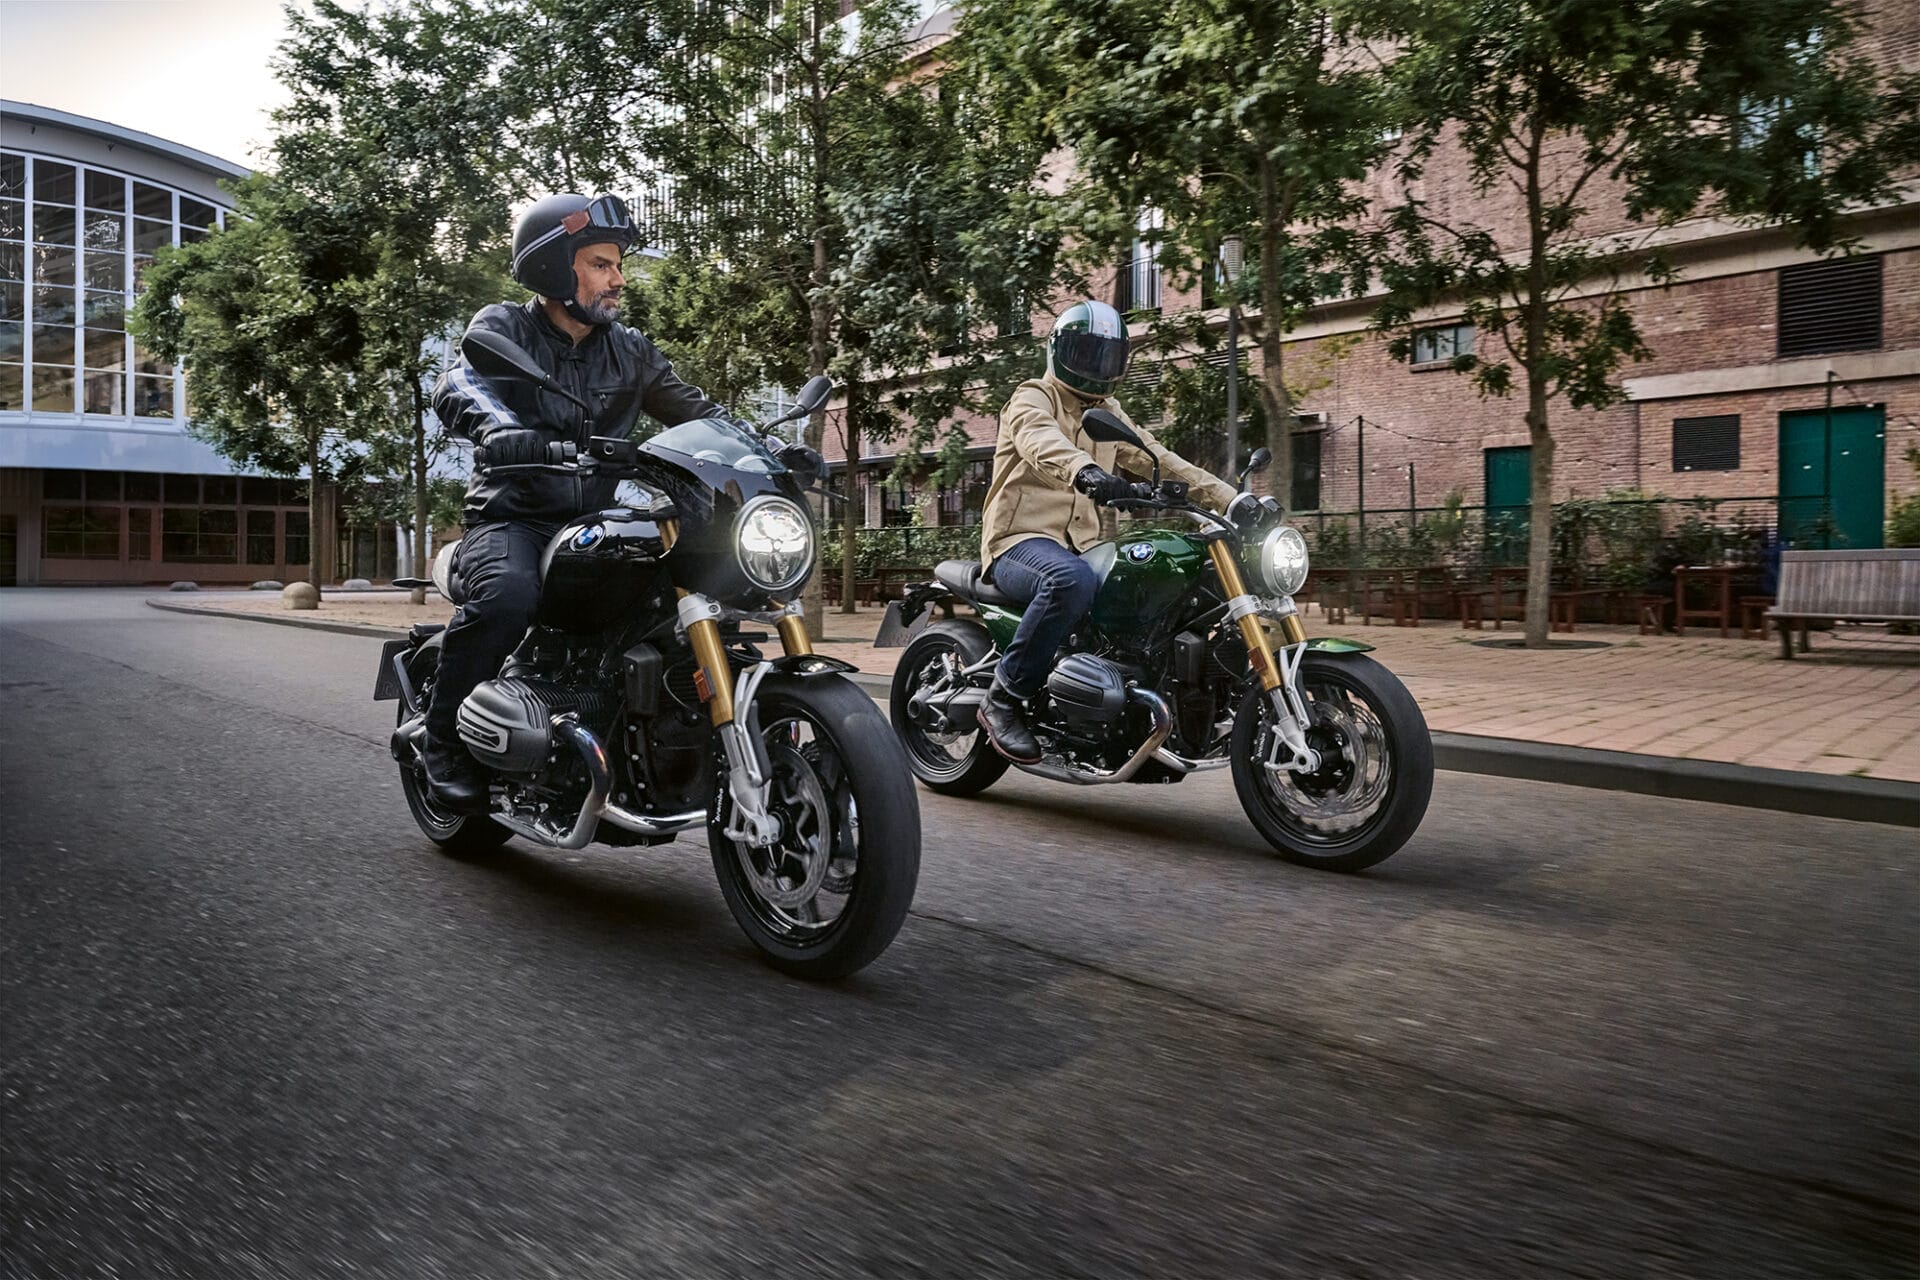 The new BMW R 12 nineT and R 12: Modern classics in the motorcycle sector